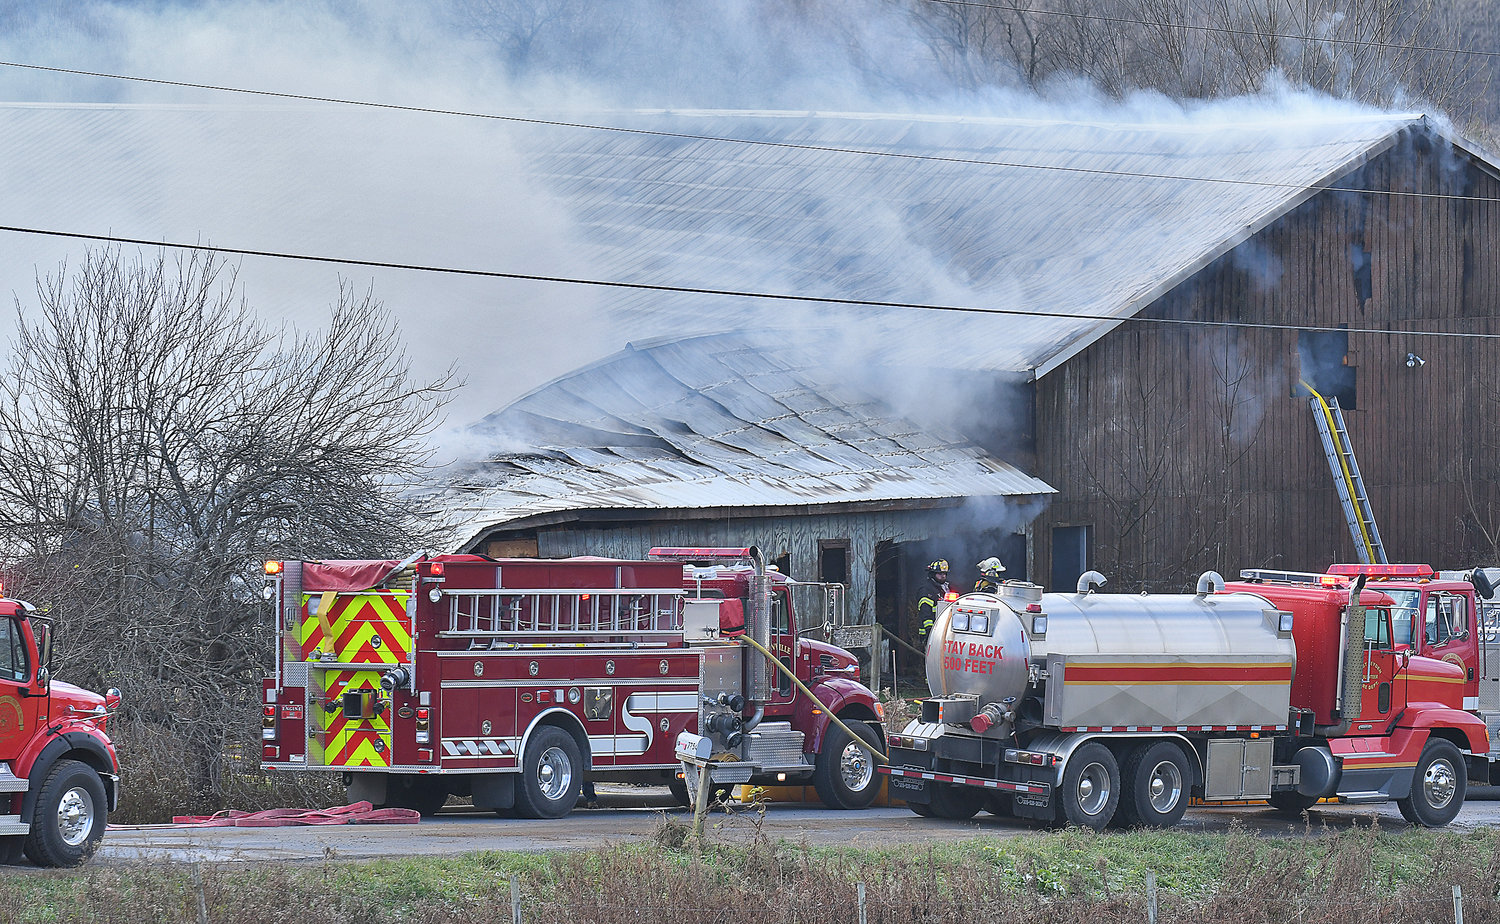 Firefighters from Boonville, Constableville, Westernville and West Leyden fire companies work a barn fire on Jackson Hill Road near the Merry Hill Road intersection in the Town of Ava Monday morning. Due to a lack of water, firefighters utilized portable water tankers and a nearby pond to battle the blaze.